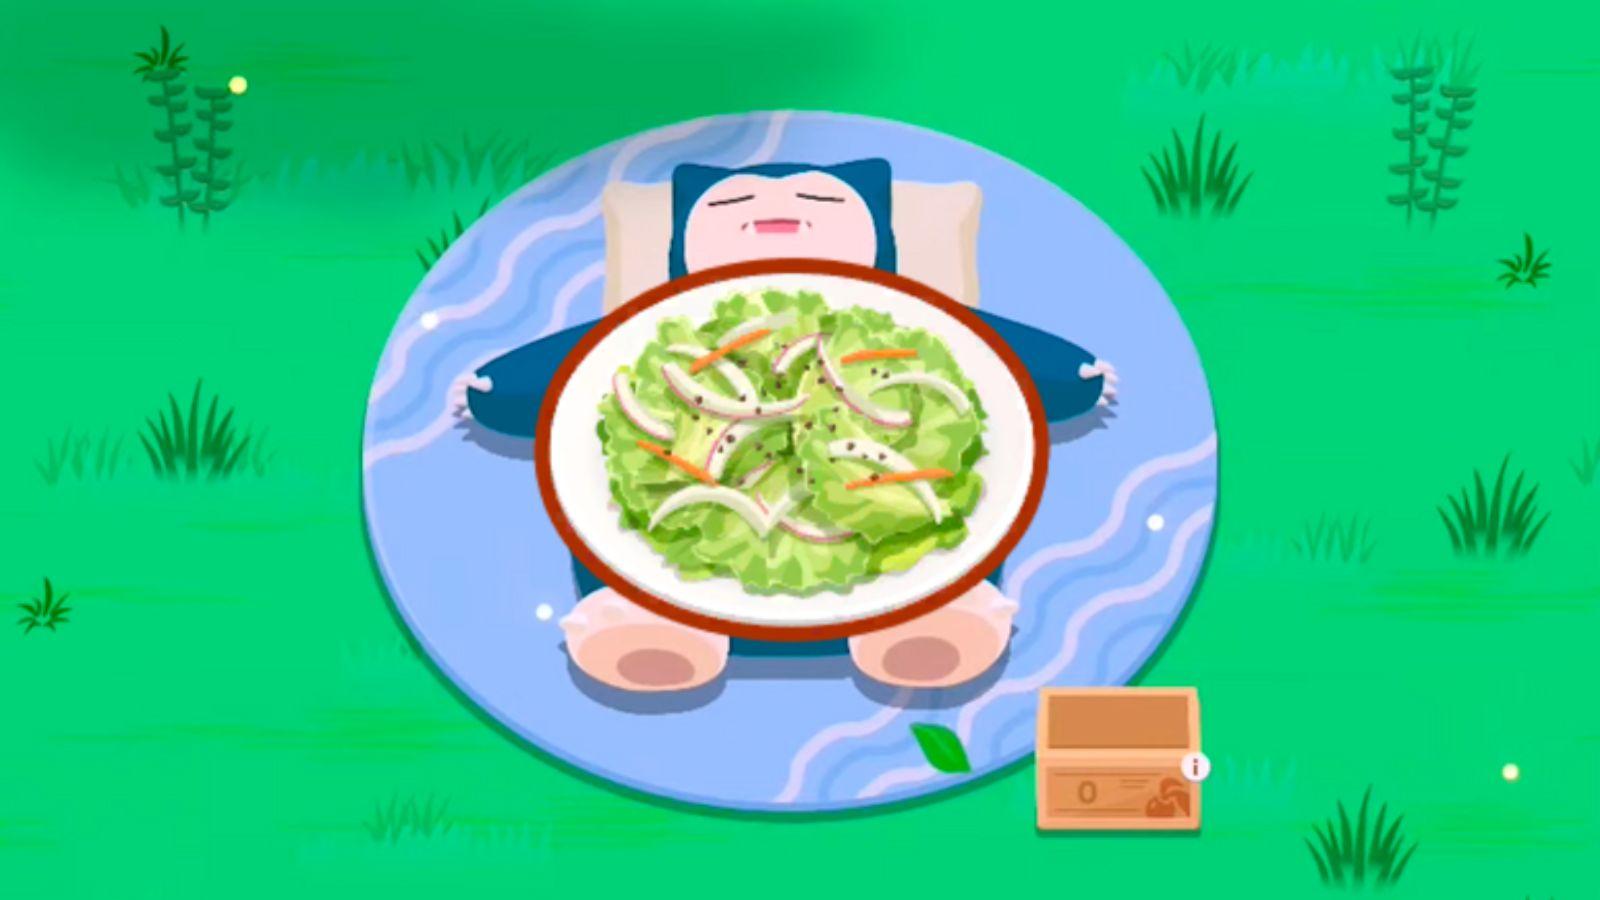 A salad recipe in front of Snorlax in Pokemon Sleep